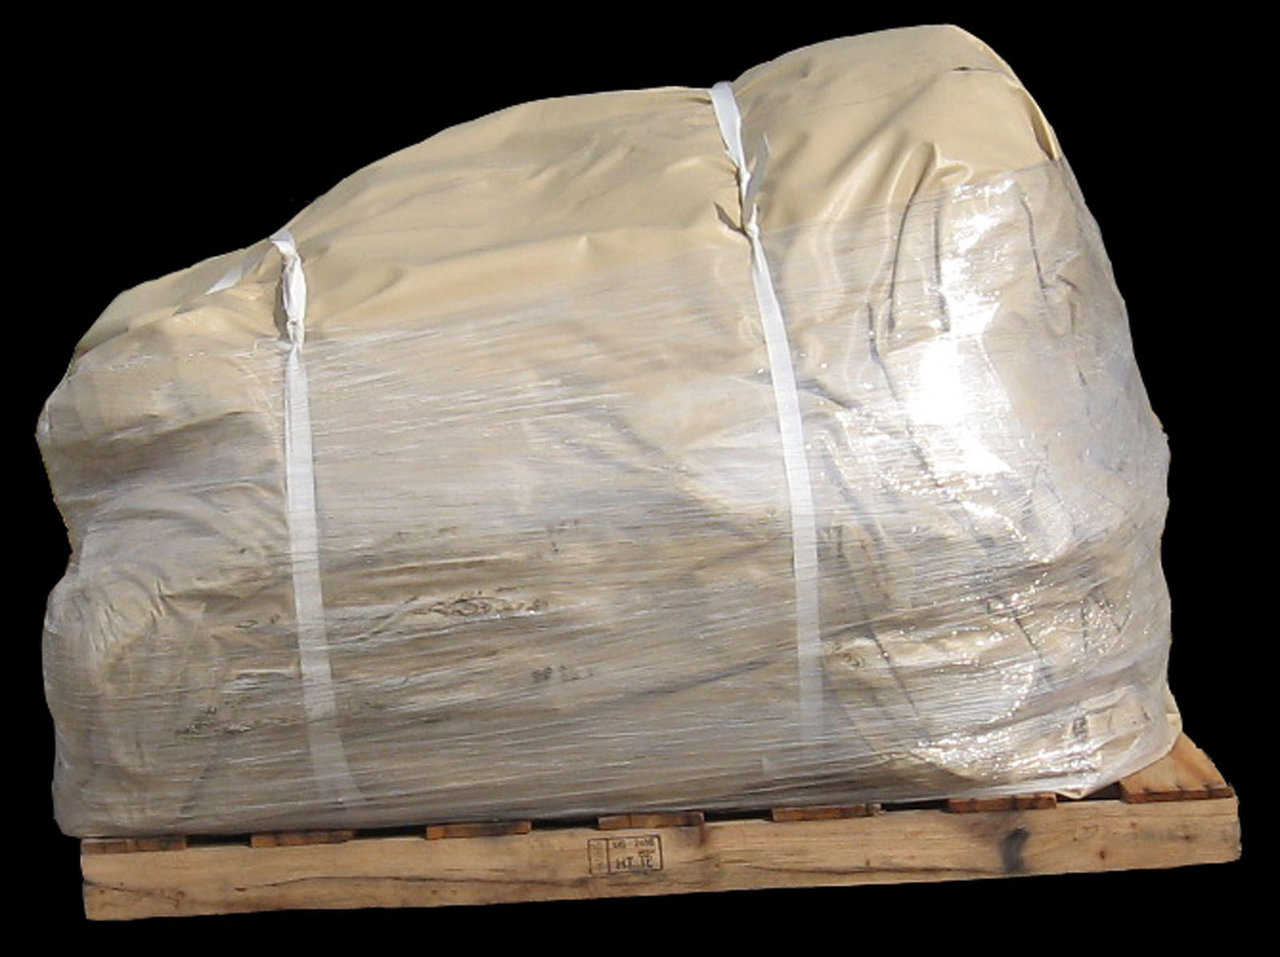 Going my way? — The shipment process includes properly folding an Airform and covering it with scrap fabric and shrink wrap.